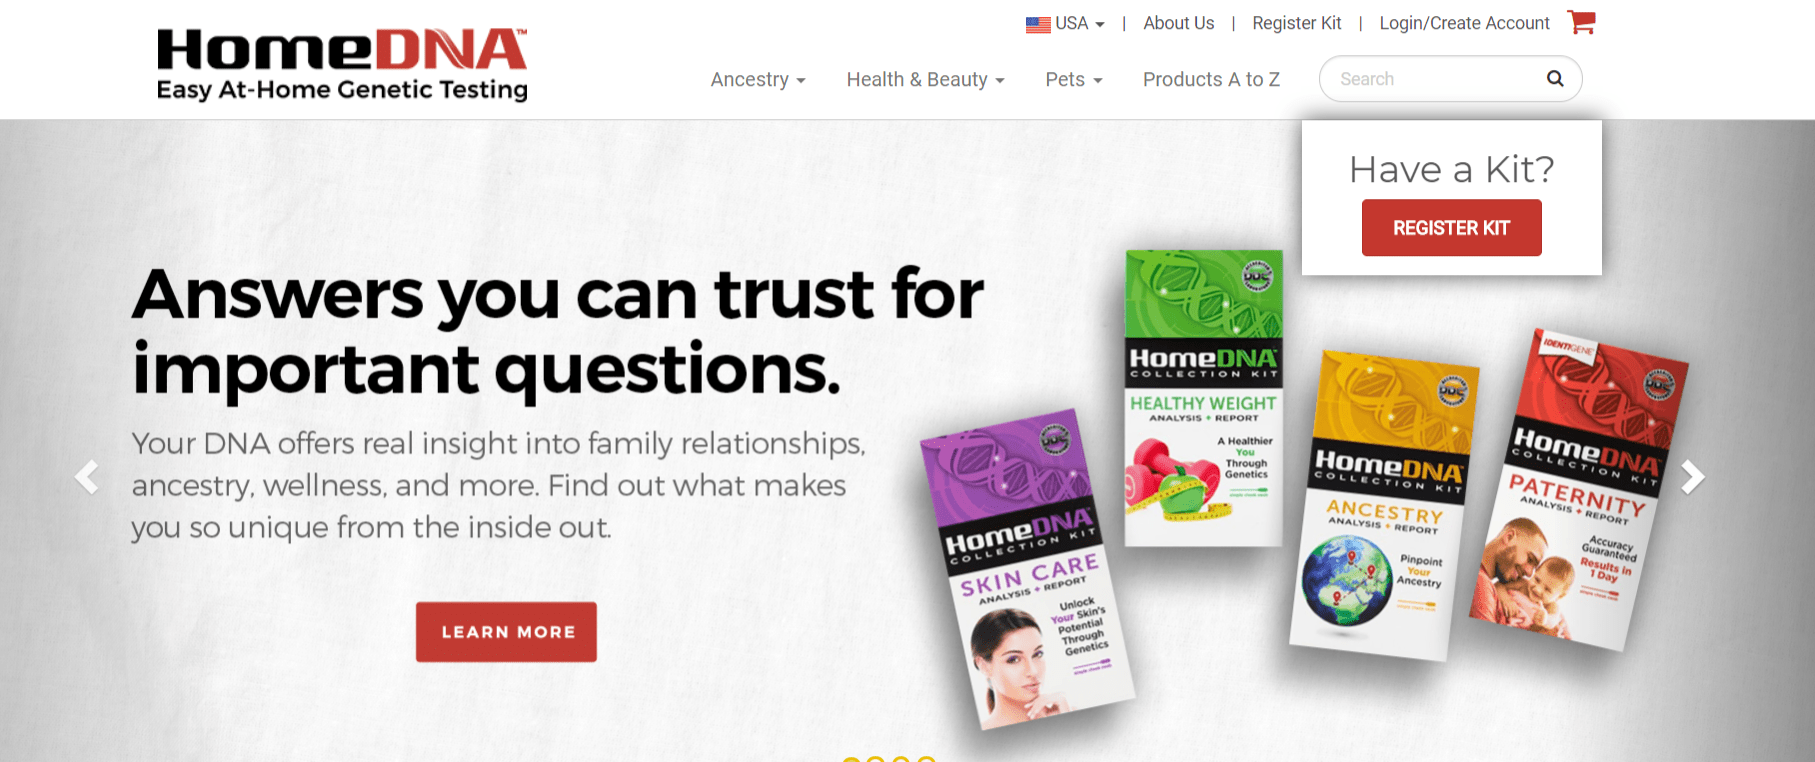 HomeDNA Coupon Codes- Easy At Home Genetic Testing